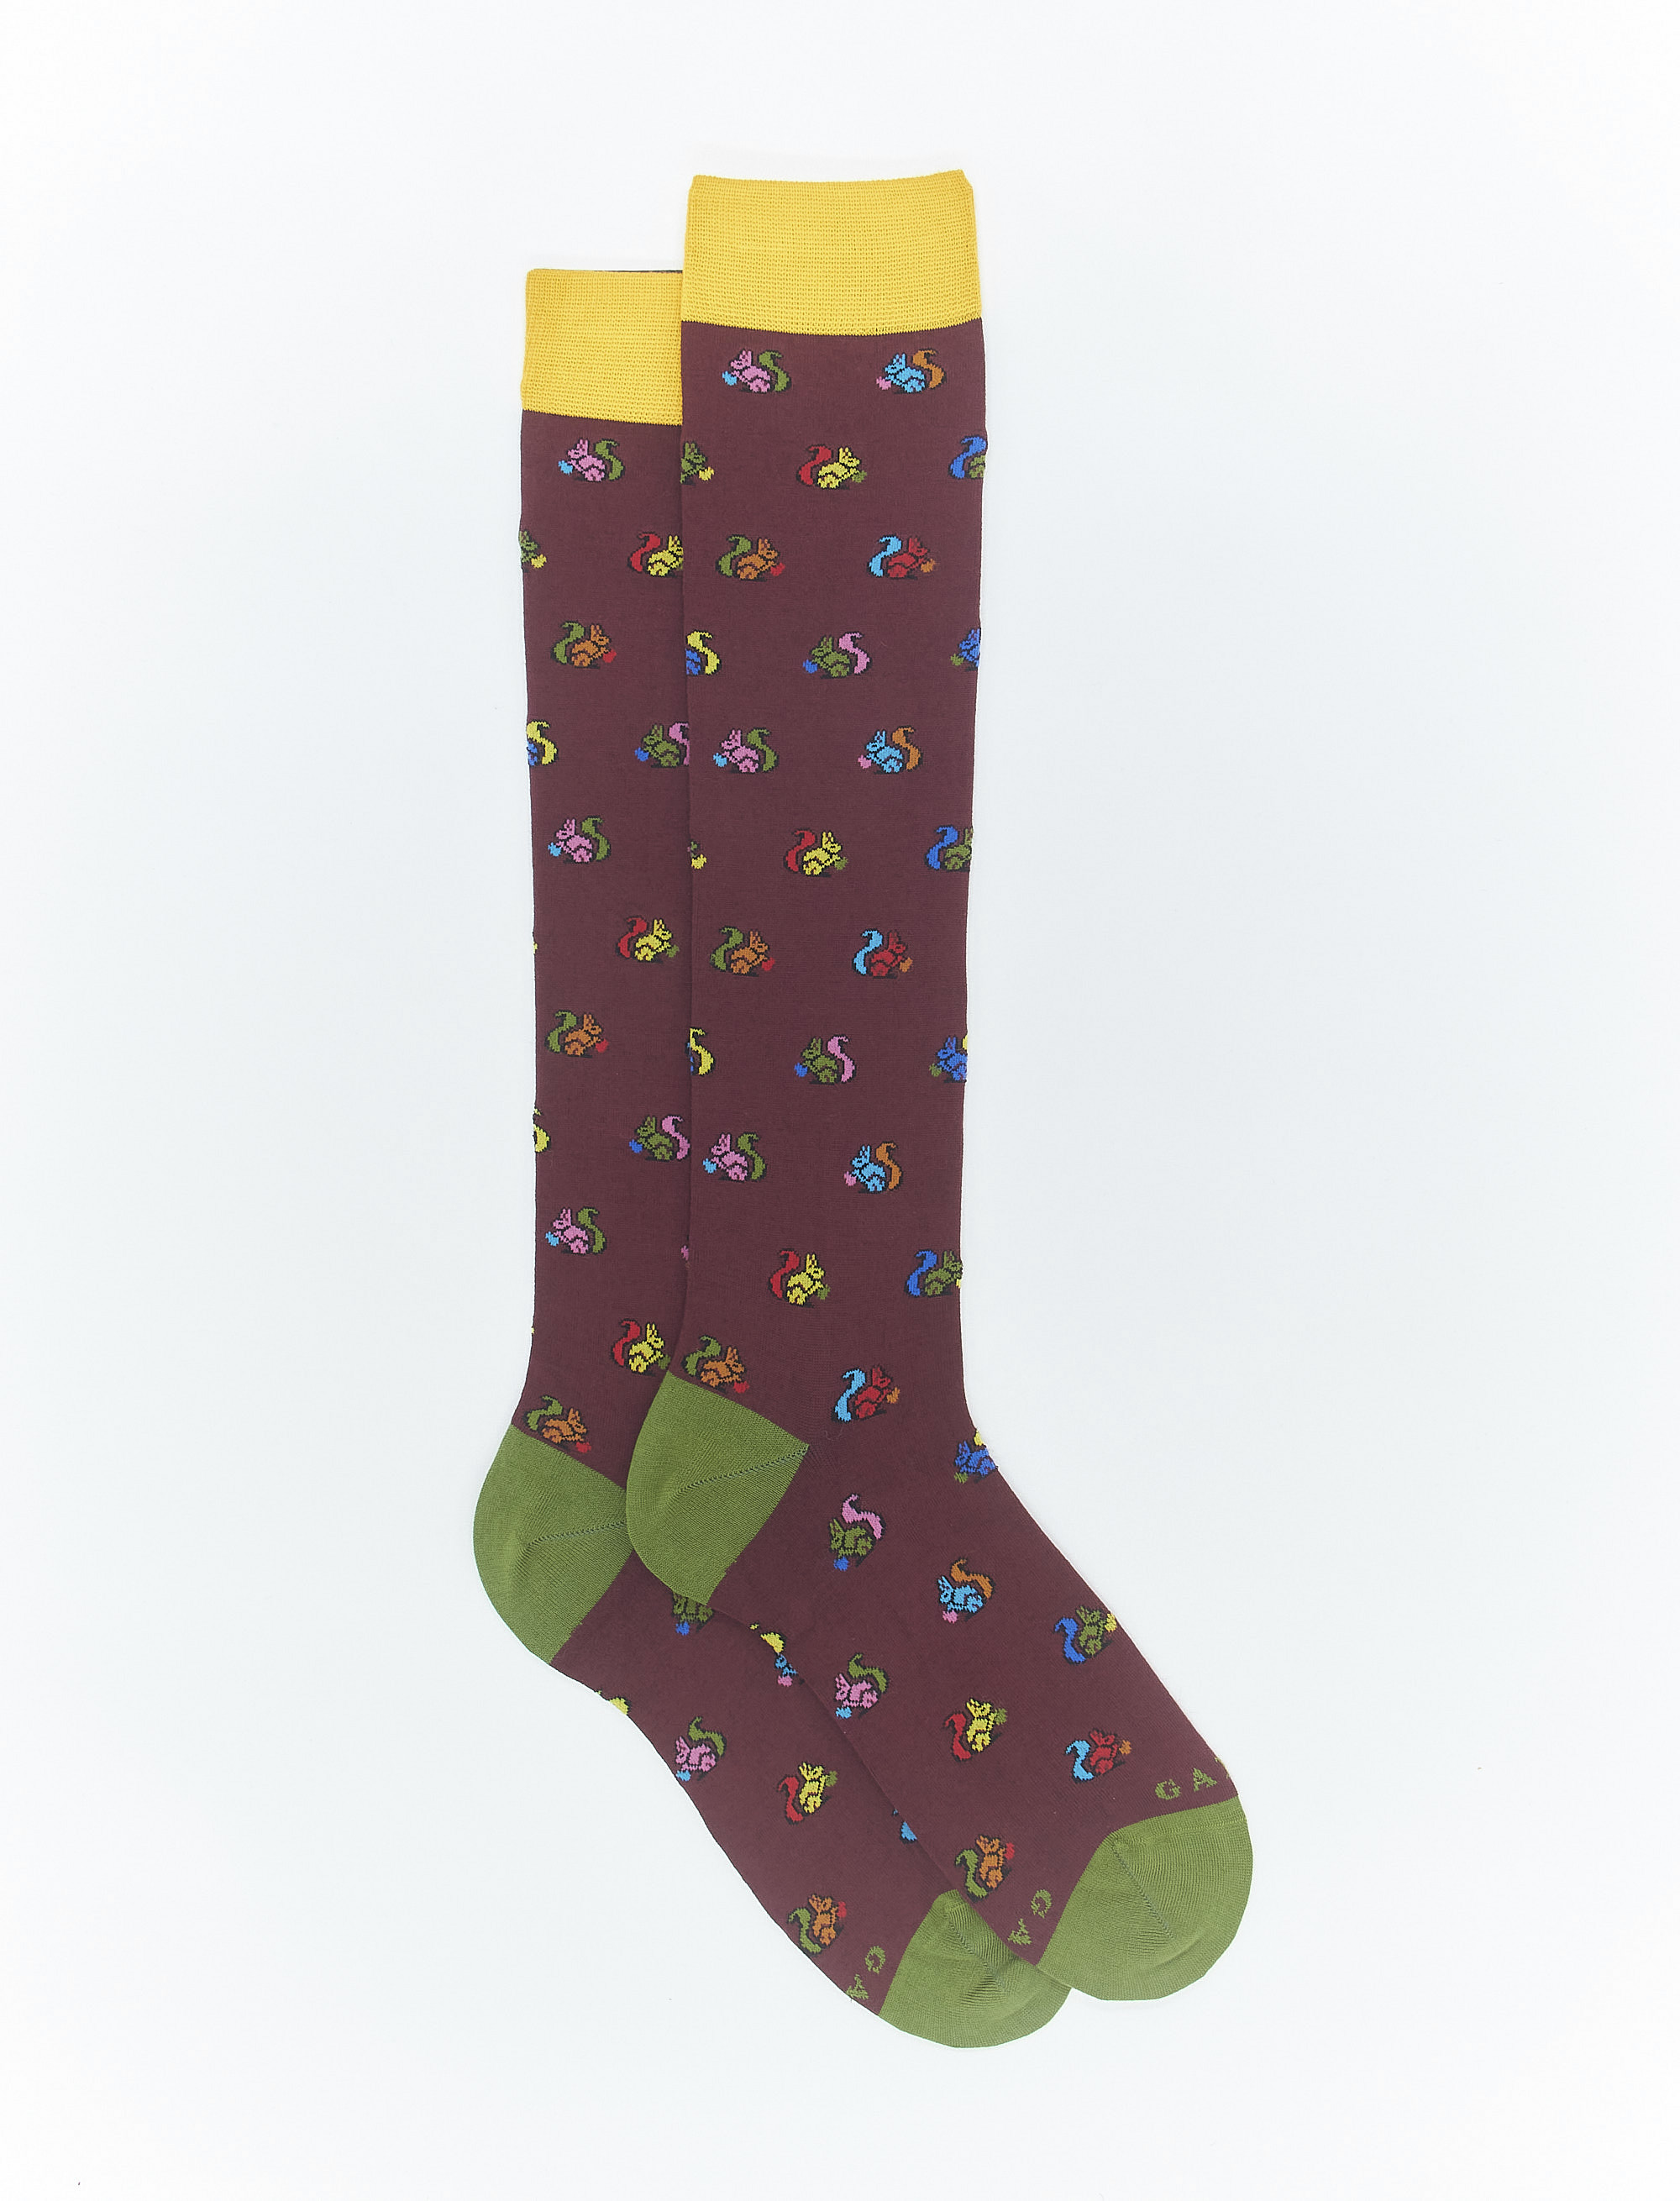 Women's long berry light cotton socks with squirrel motif - The FW Edition | Gallo 1927 - Official Online Shop